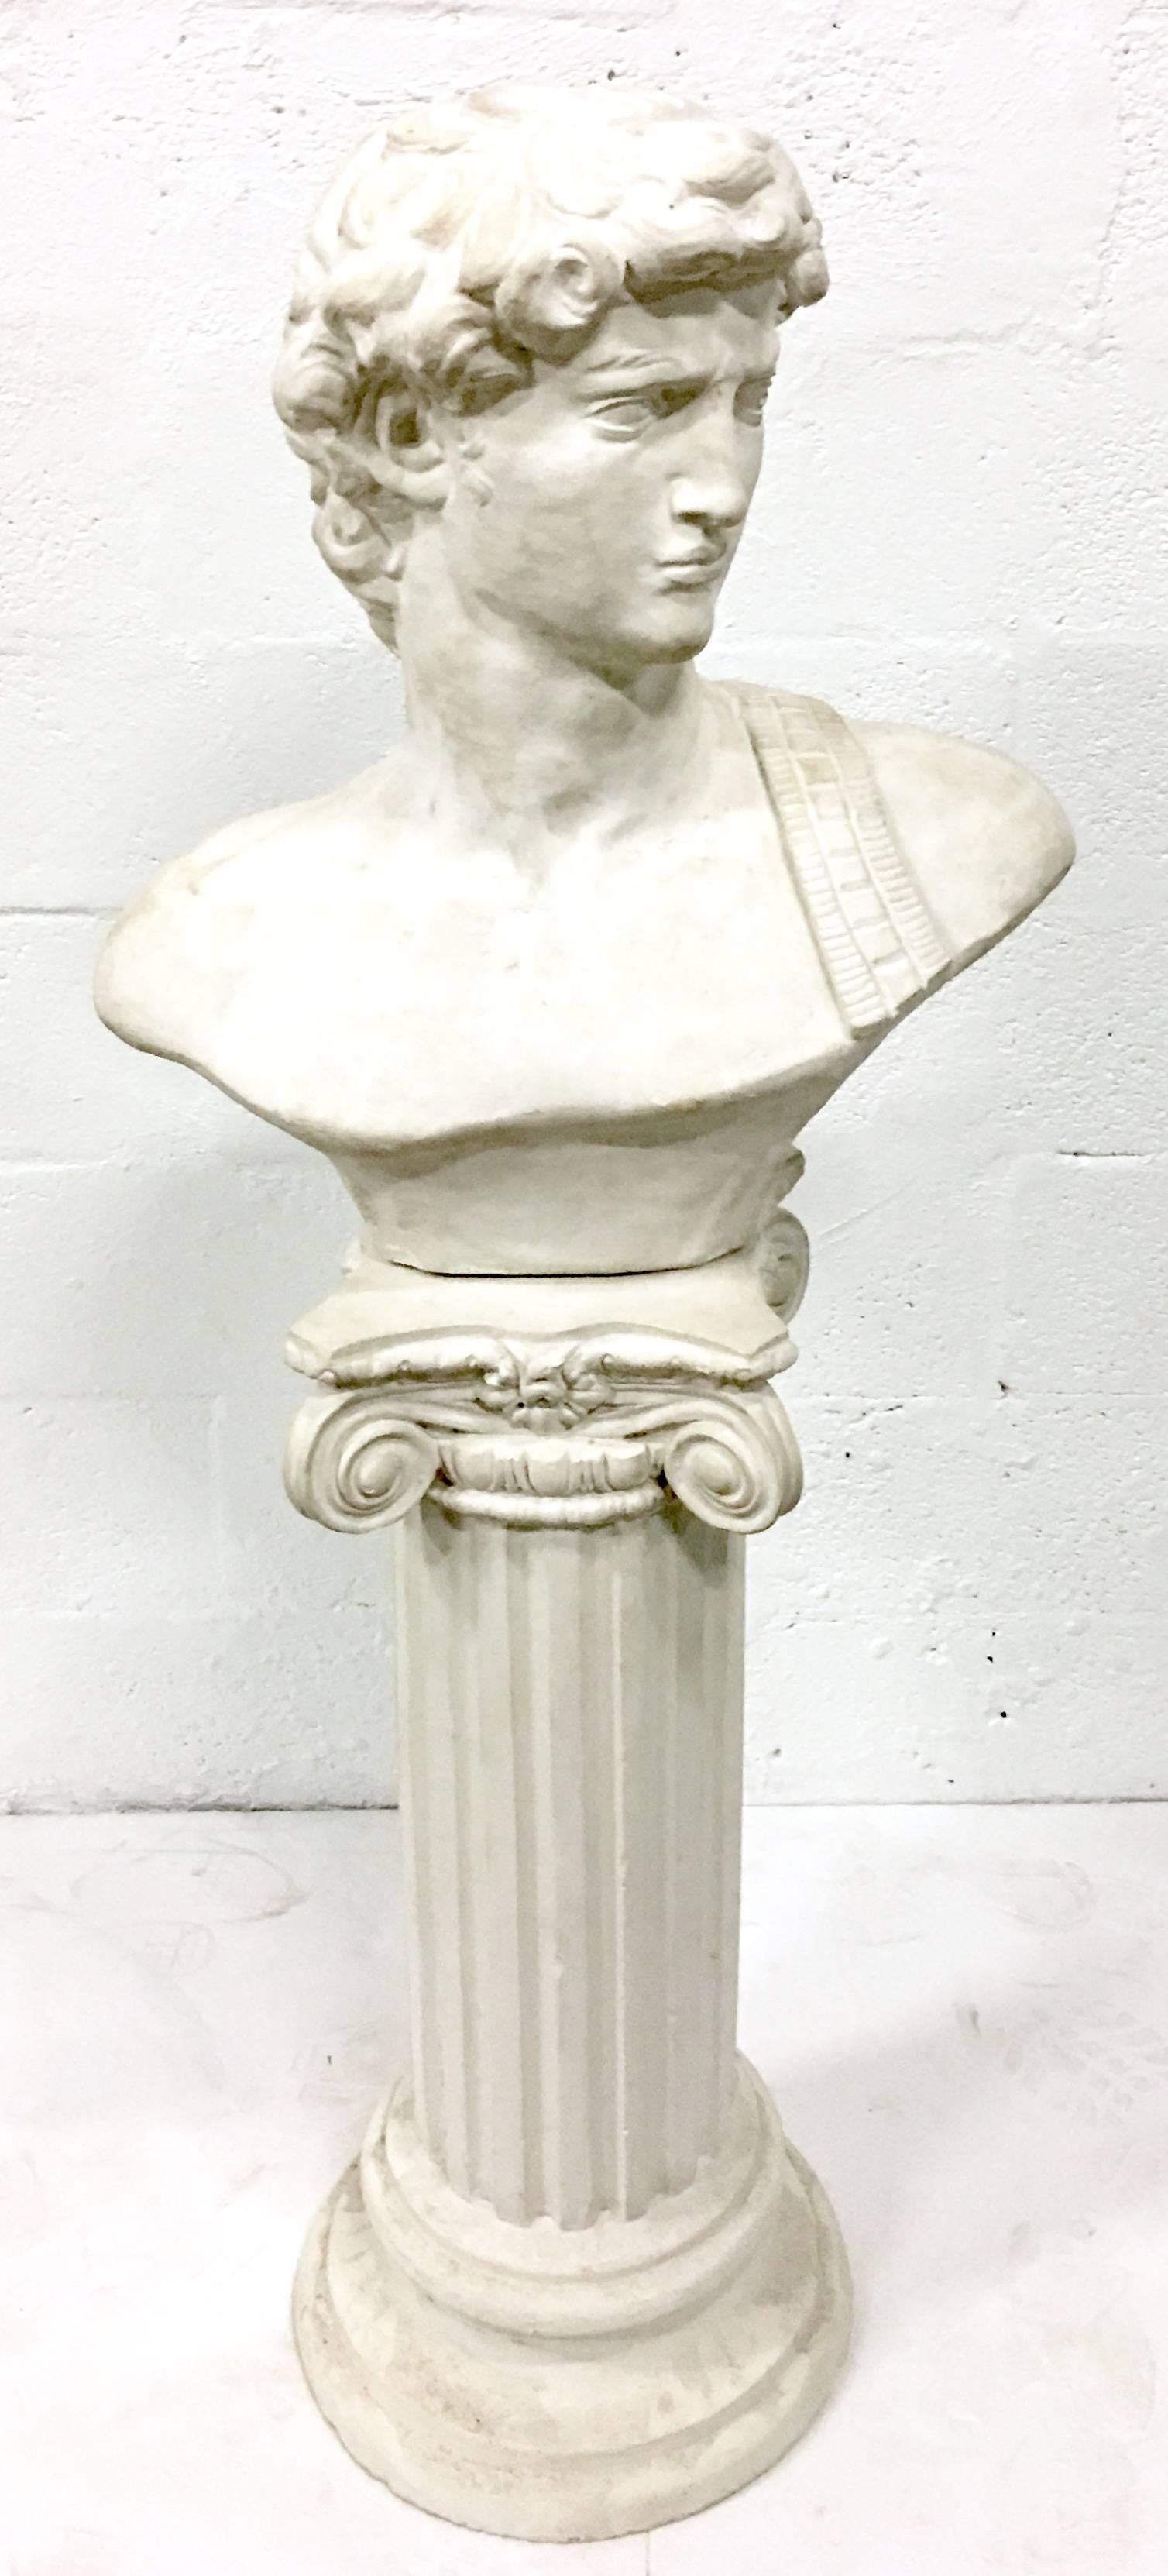 20th century cast polished stone roman bust and pedestal. Extremely well executed, with fantastic attention to detail. The bust features an iron rod at the bottom that inserts into the pedestal for stabilization. Bust only measures: 24